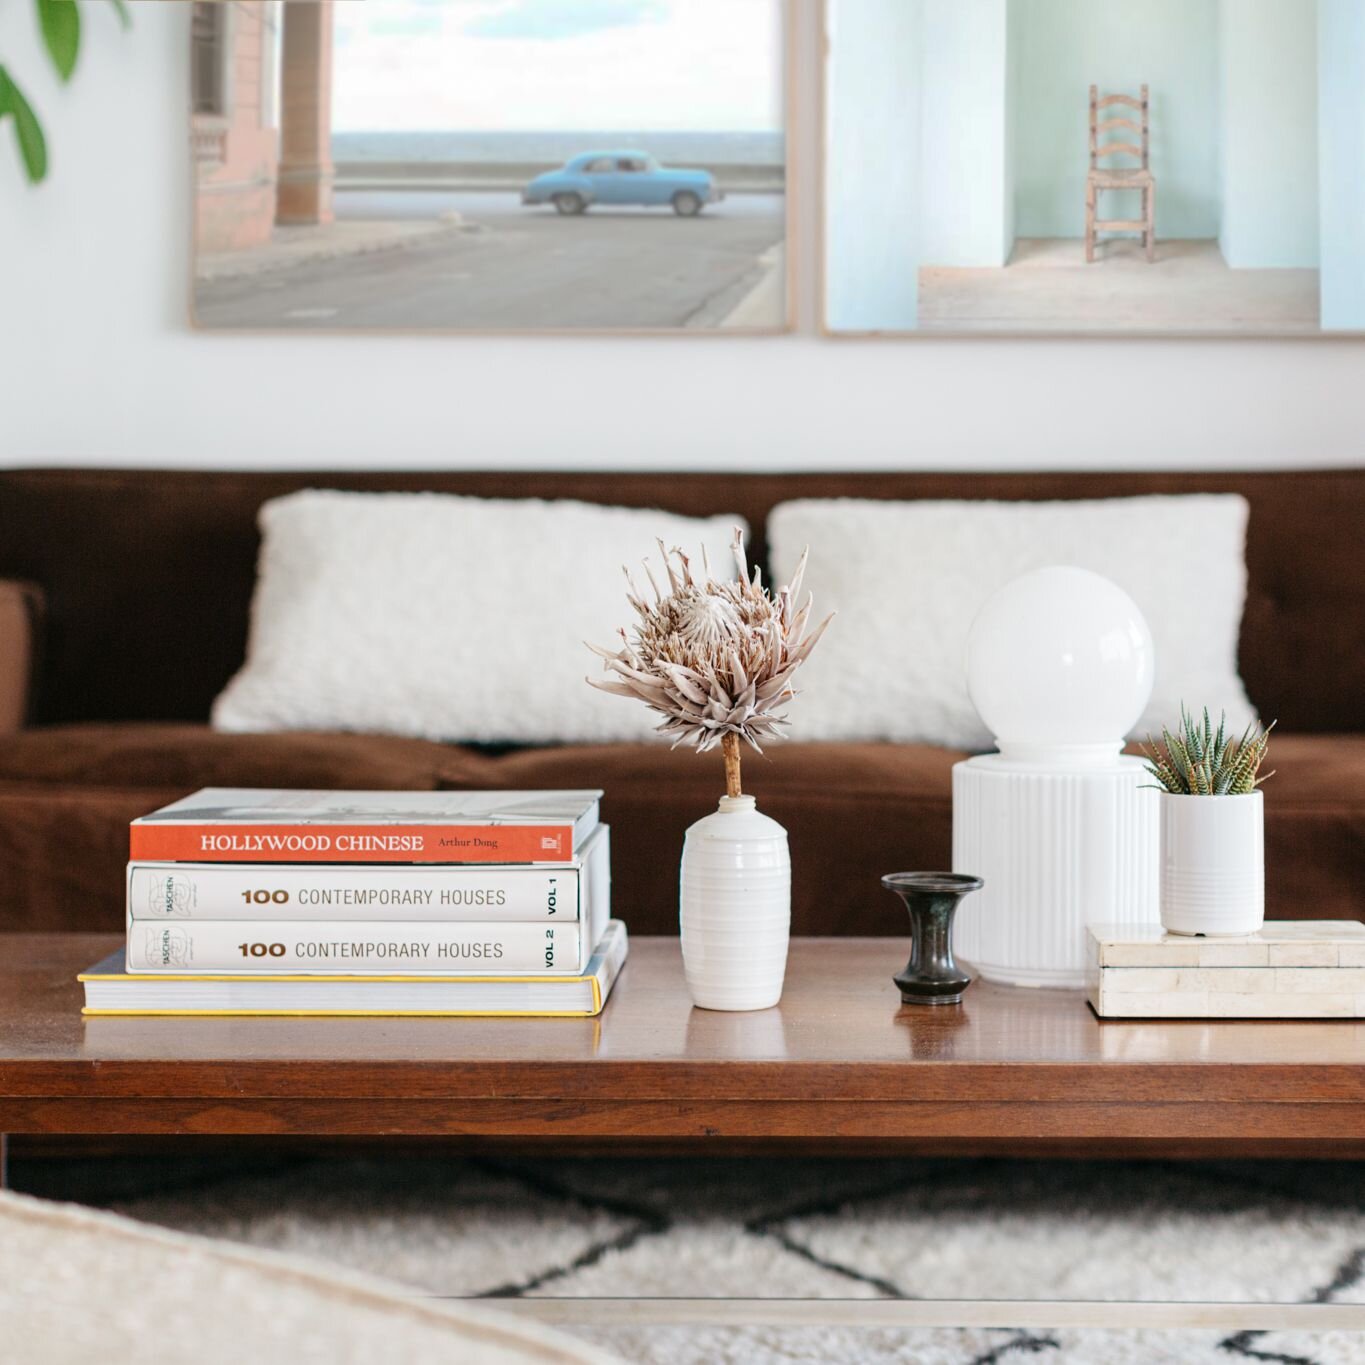 Must Have Monday - Styling and Coffee Table Books